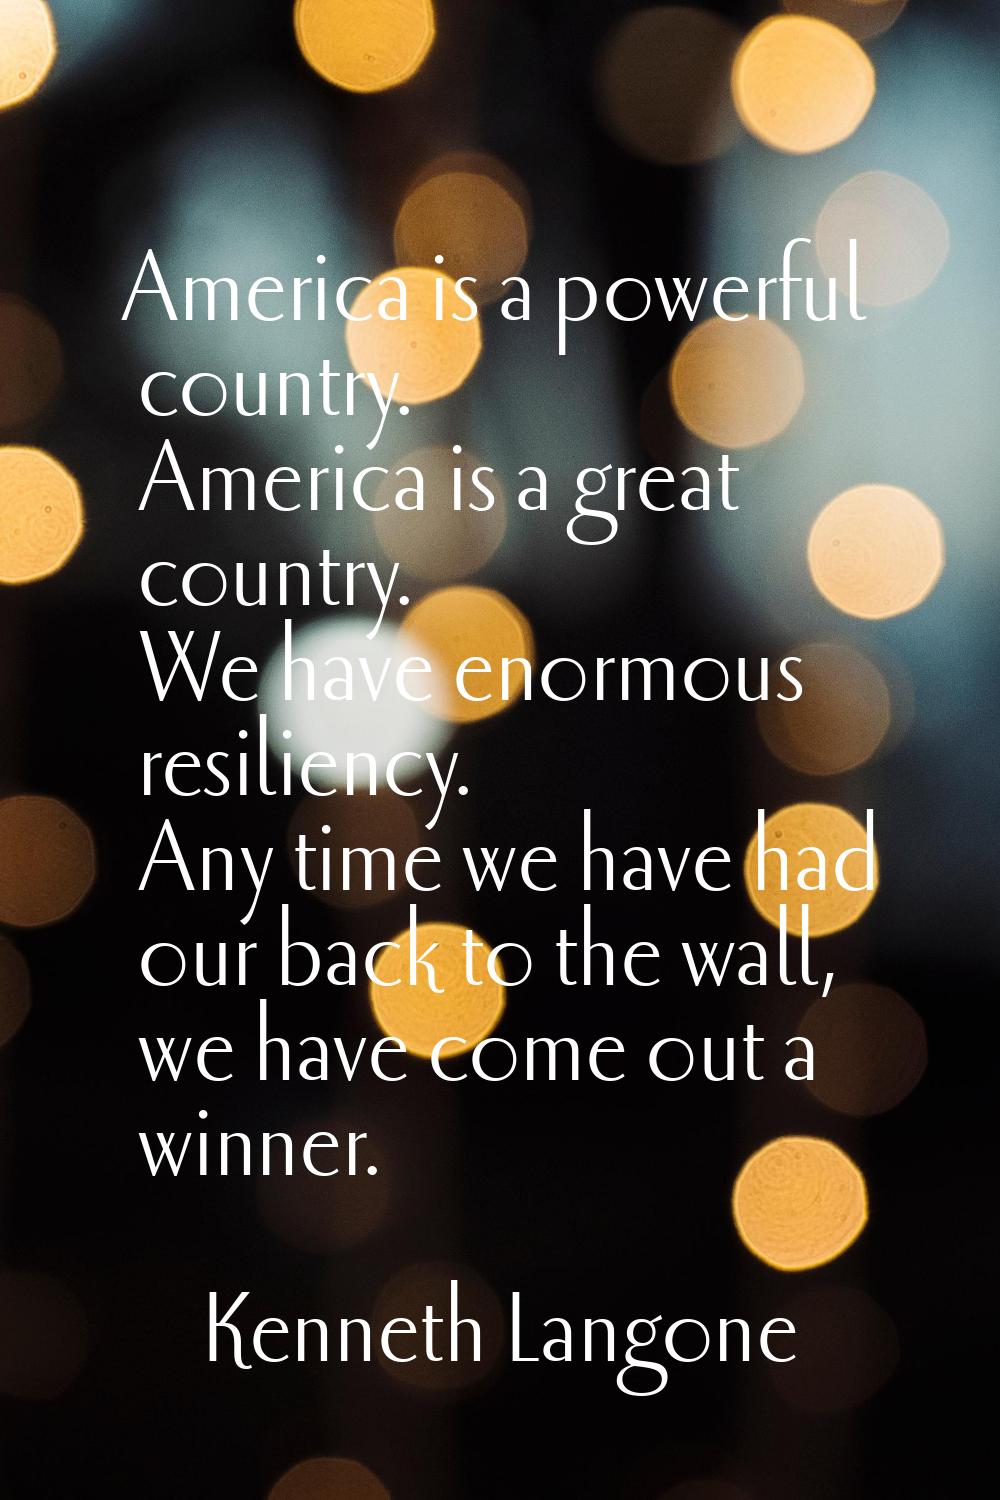 America is a powerful country. America is a great country. We have enormous resiliency. Any time we